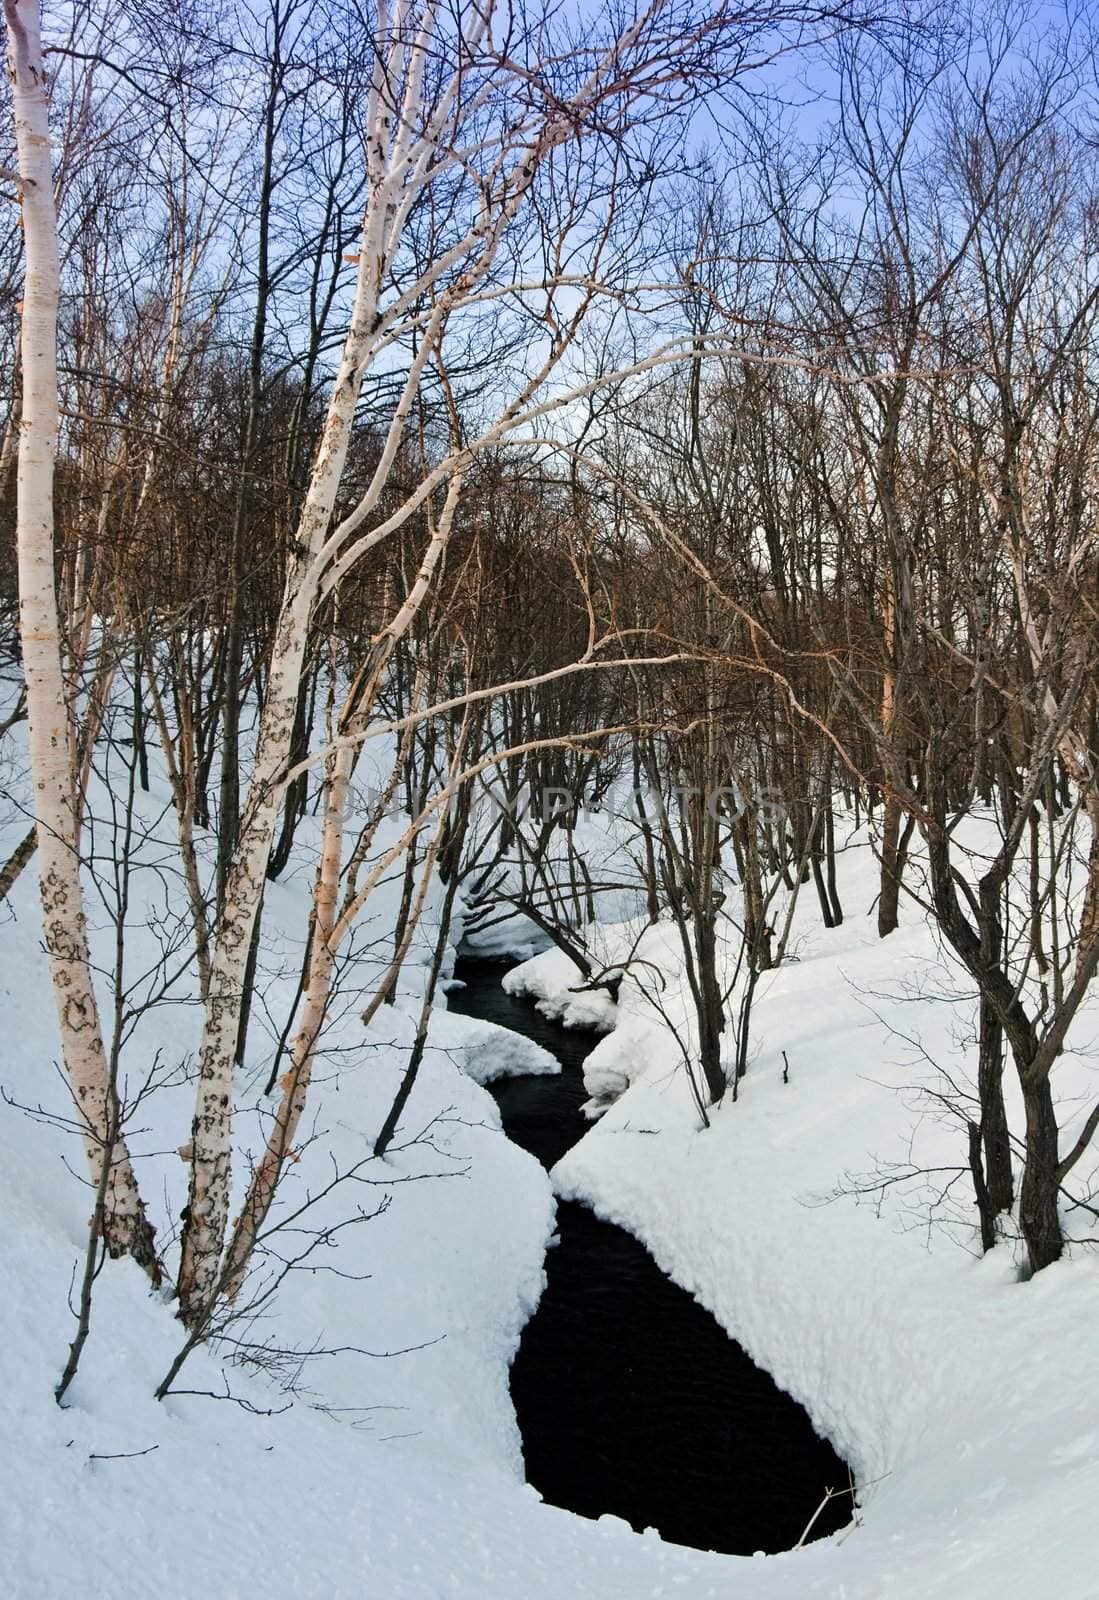 Landscape with the river covered with snow and trees